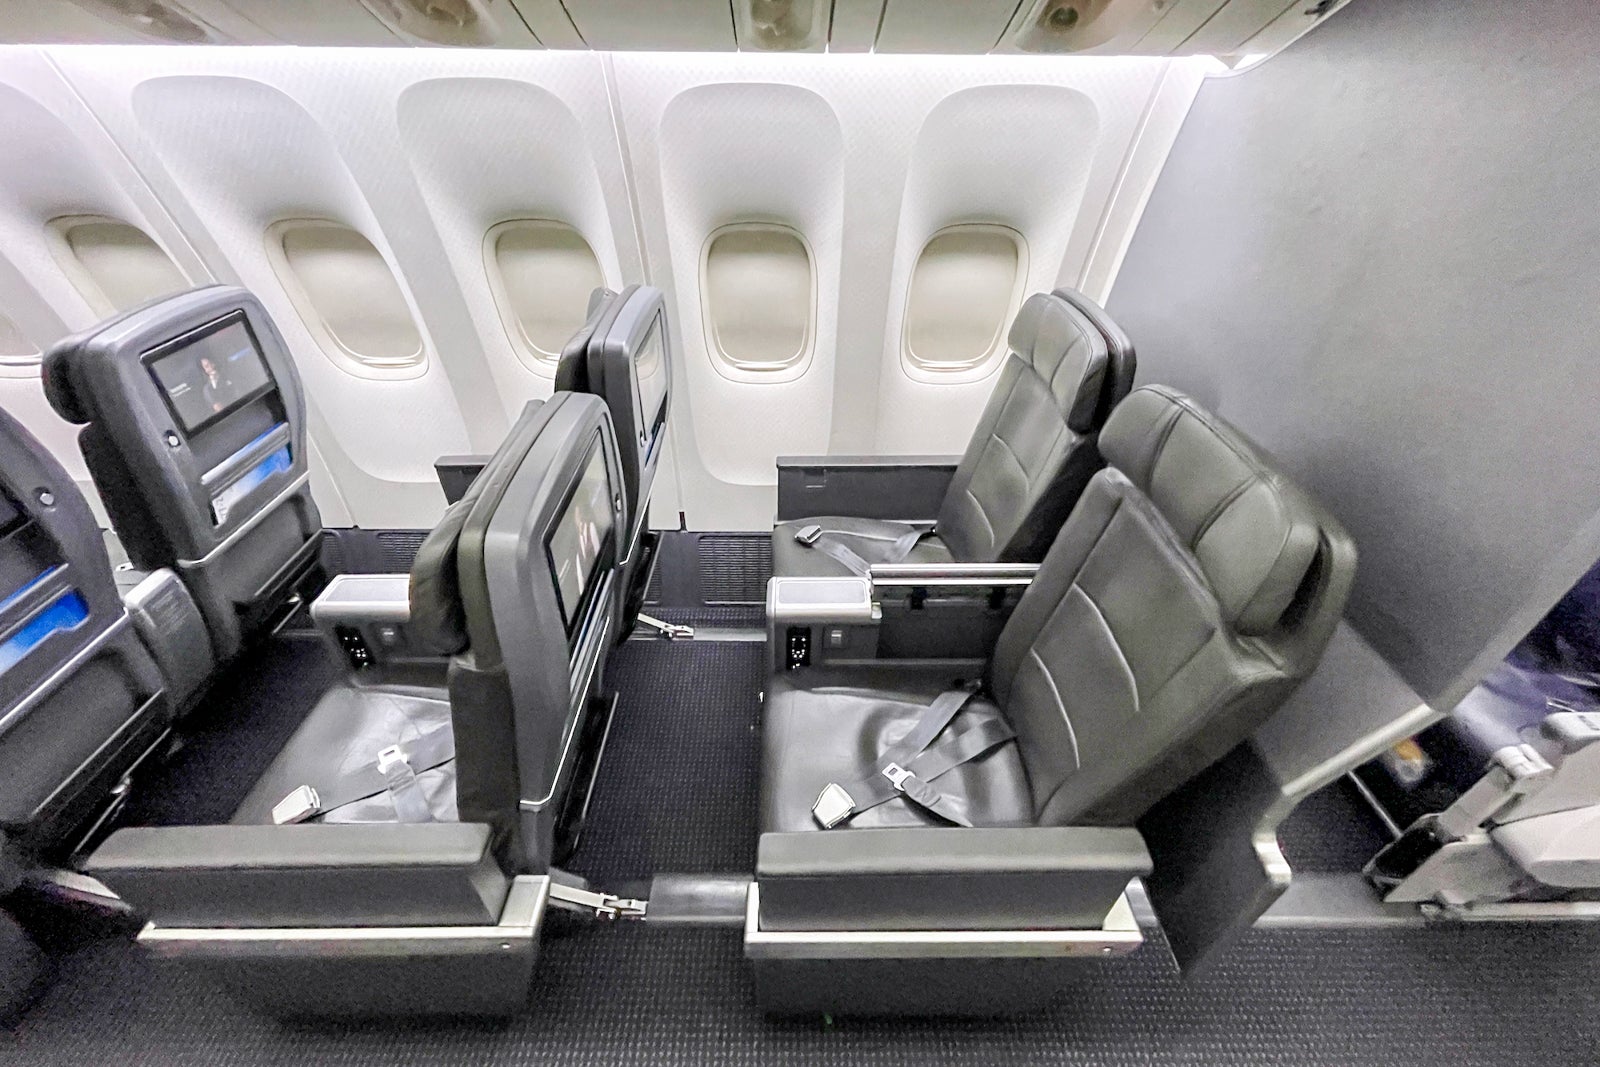 American makes domestic premium economy upgrades available to all